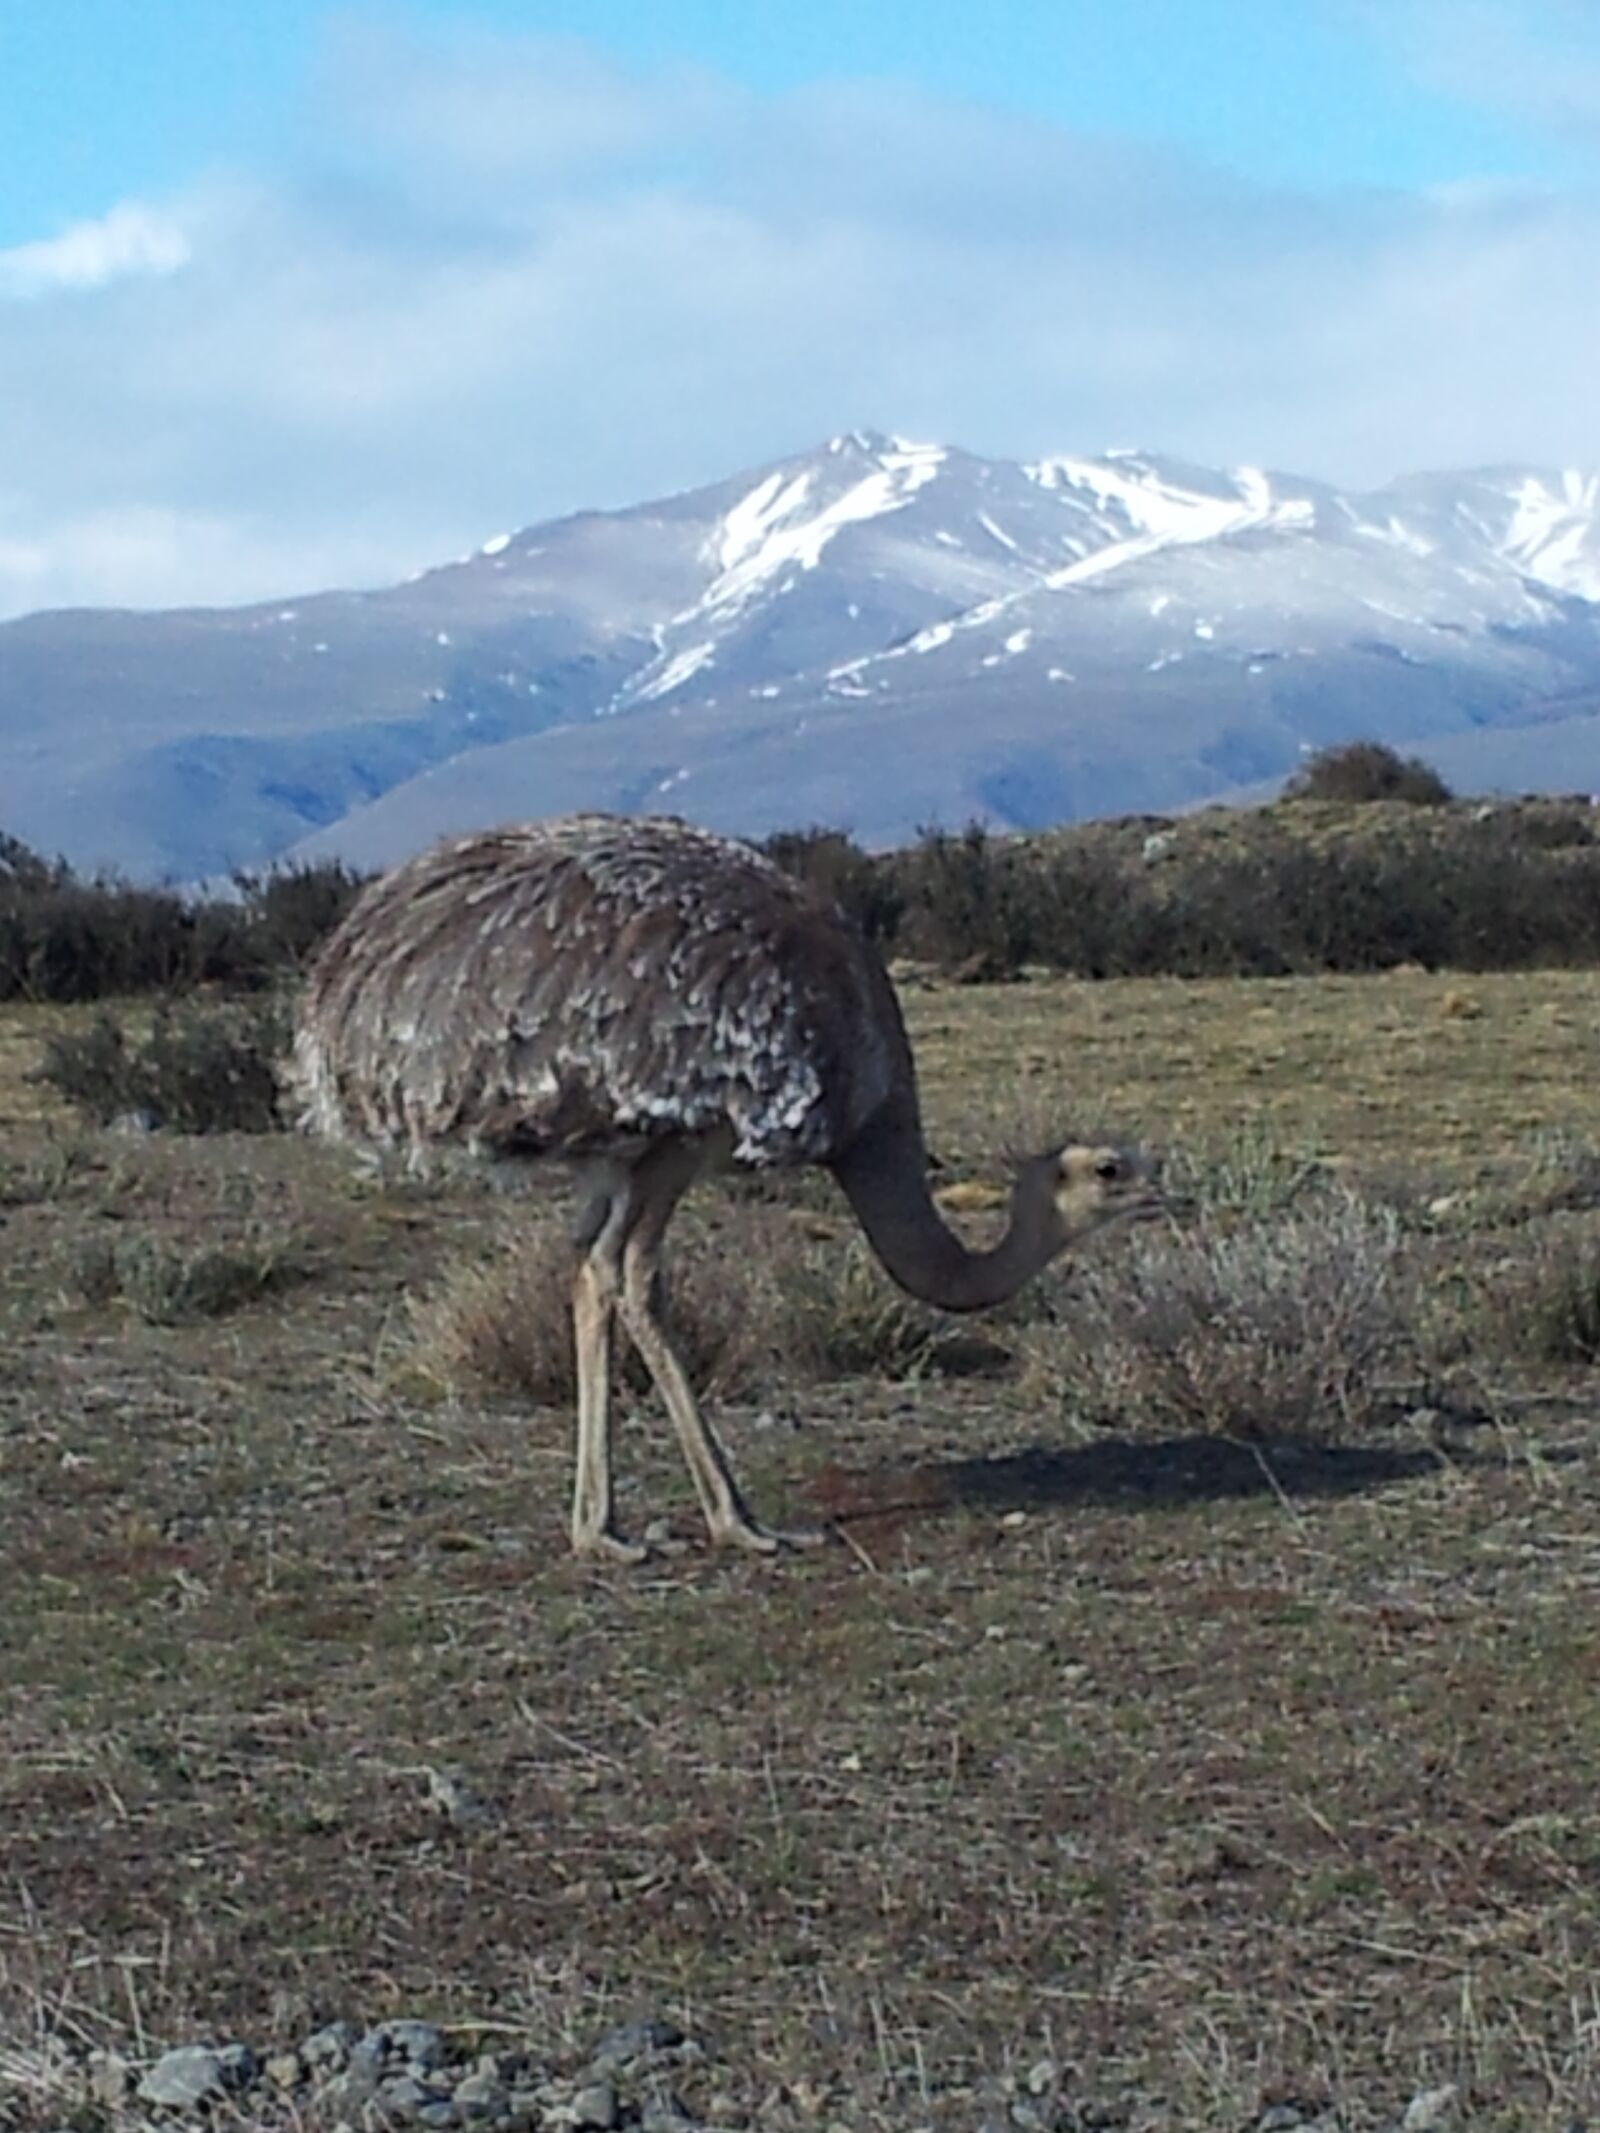 Samsung Galaxy S2 sample photo. Andu, ave patagonica, puerto photography